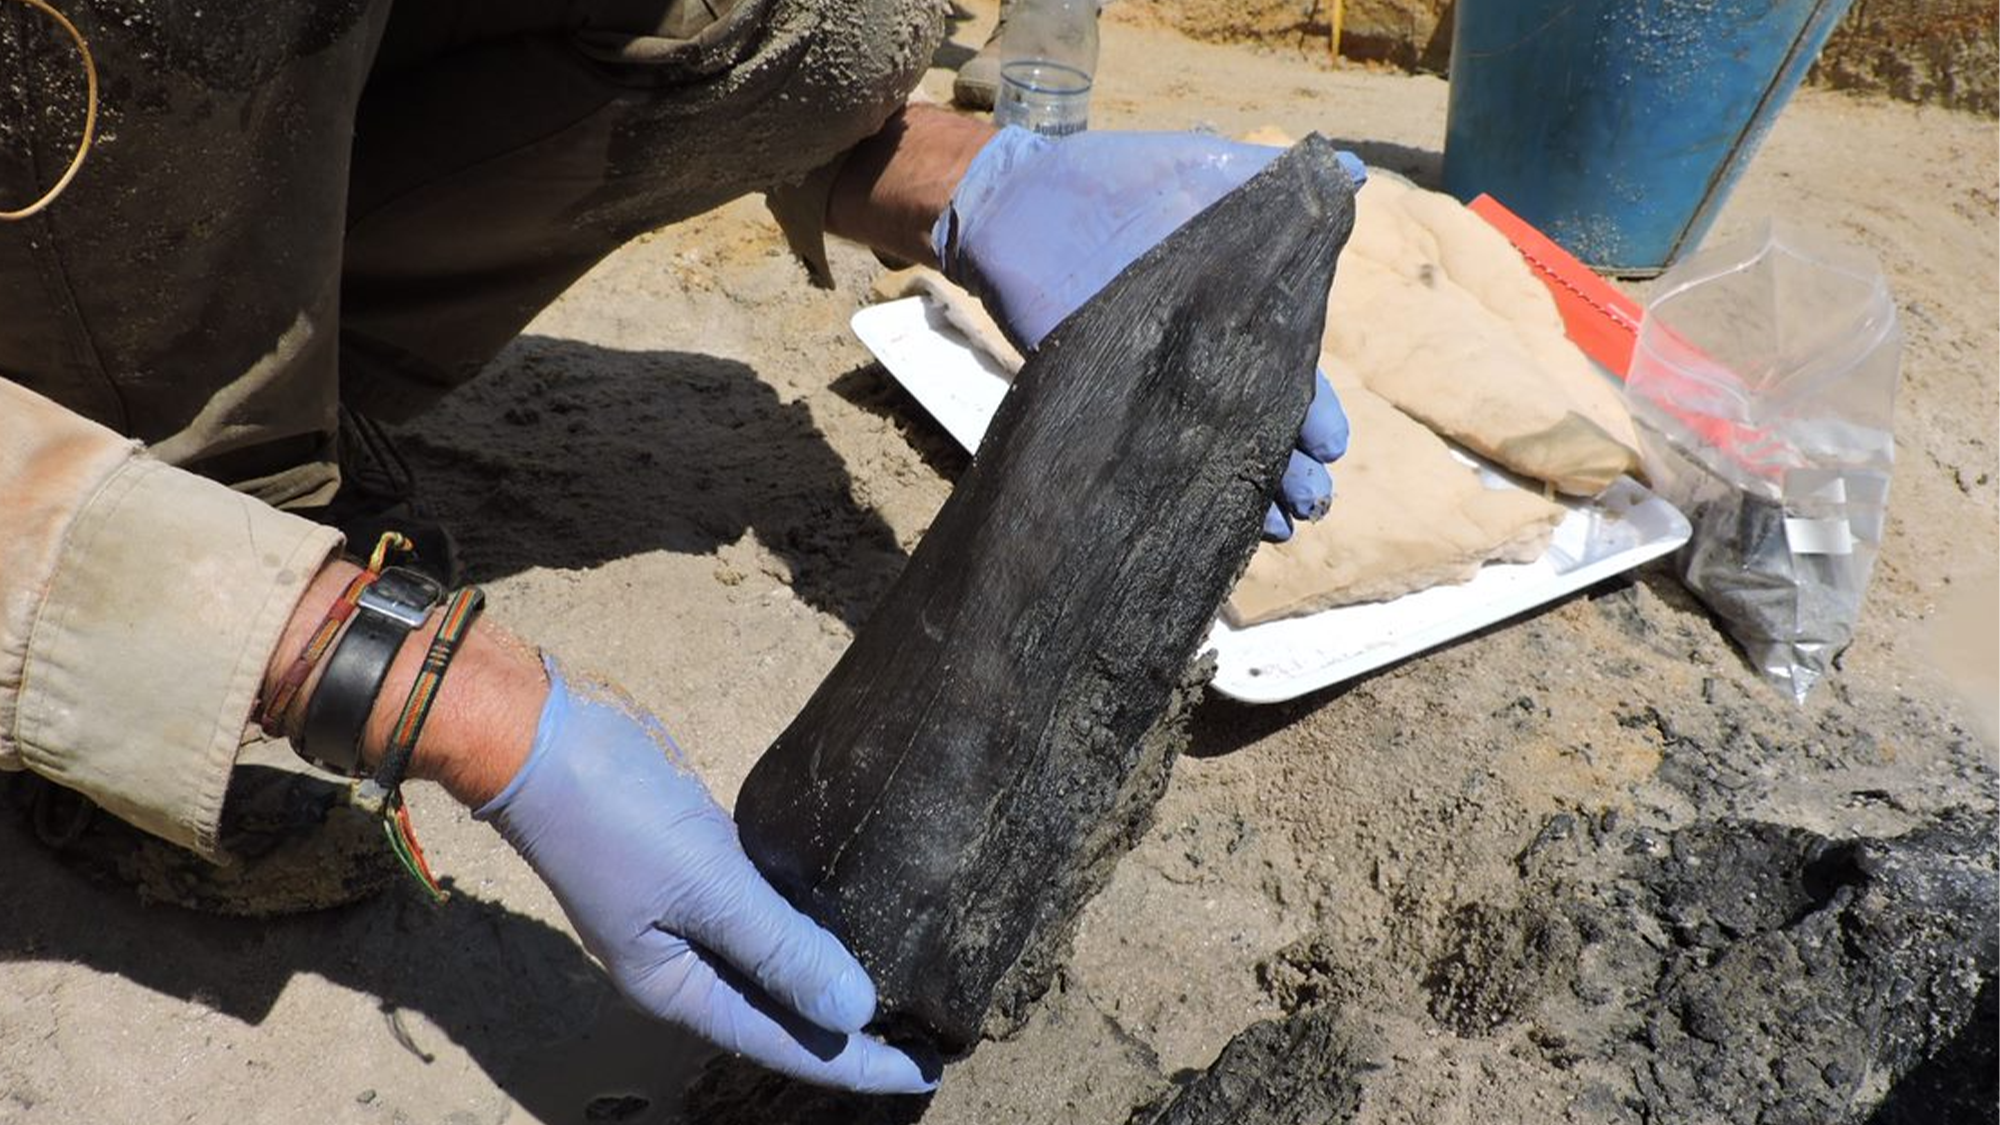 World's oldest known wooden structure found in Zambia